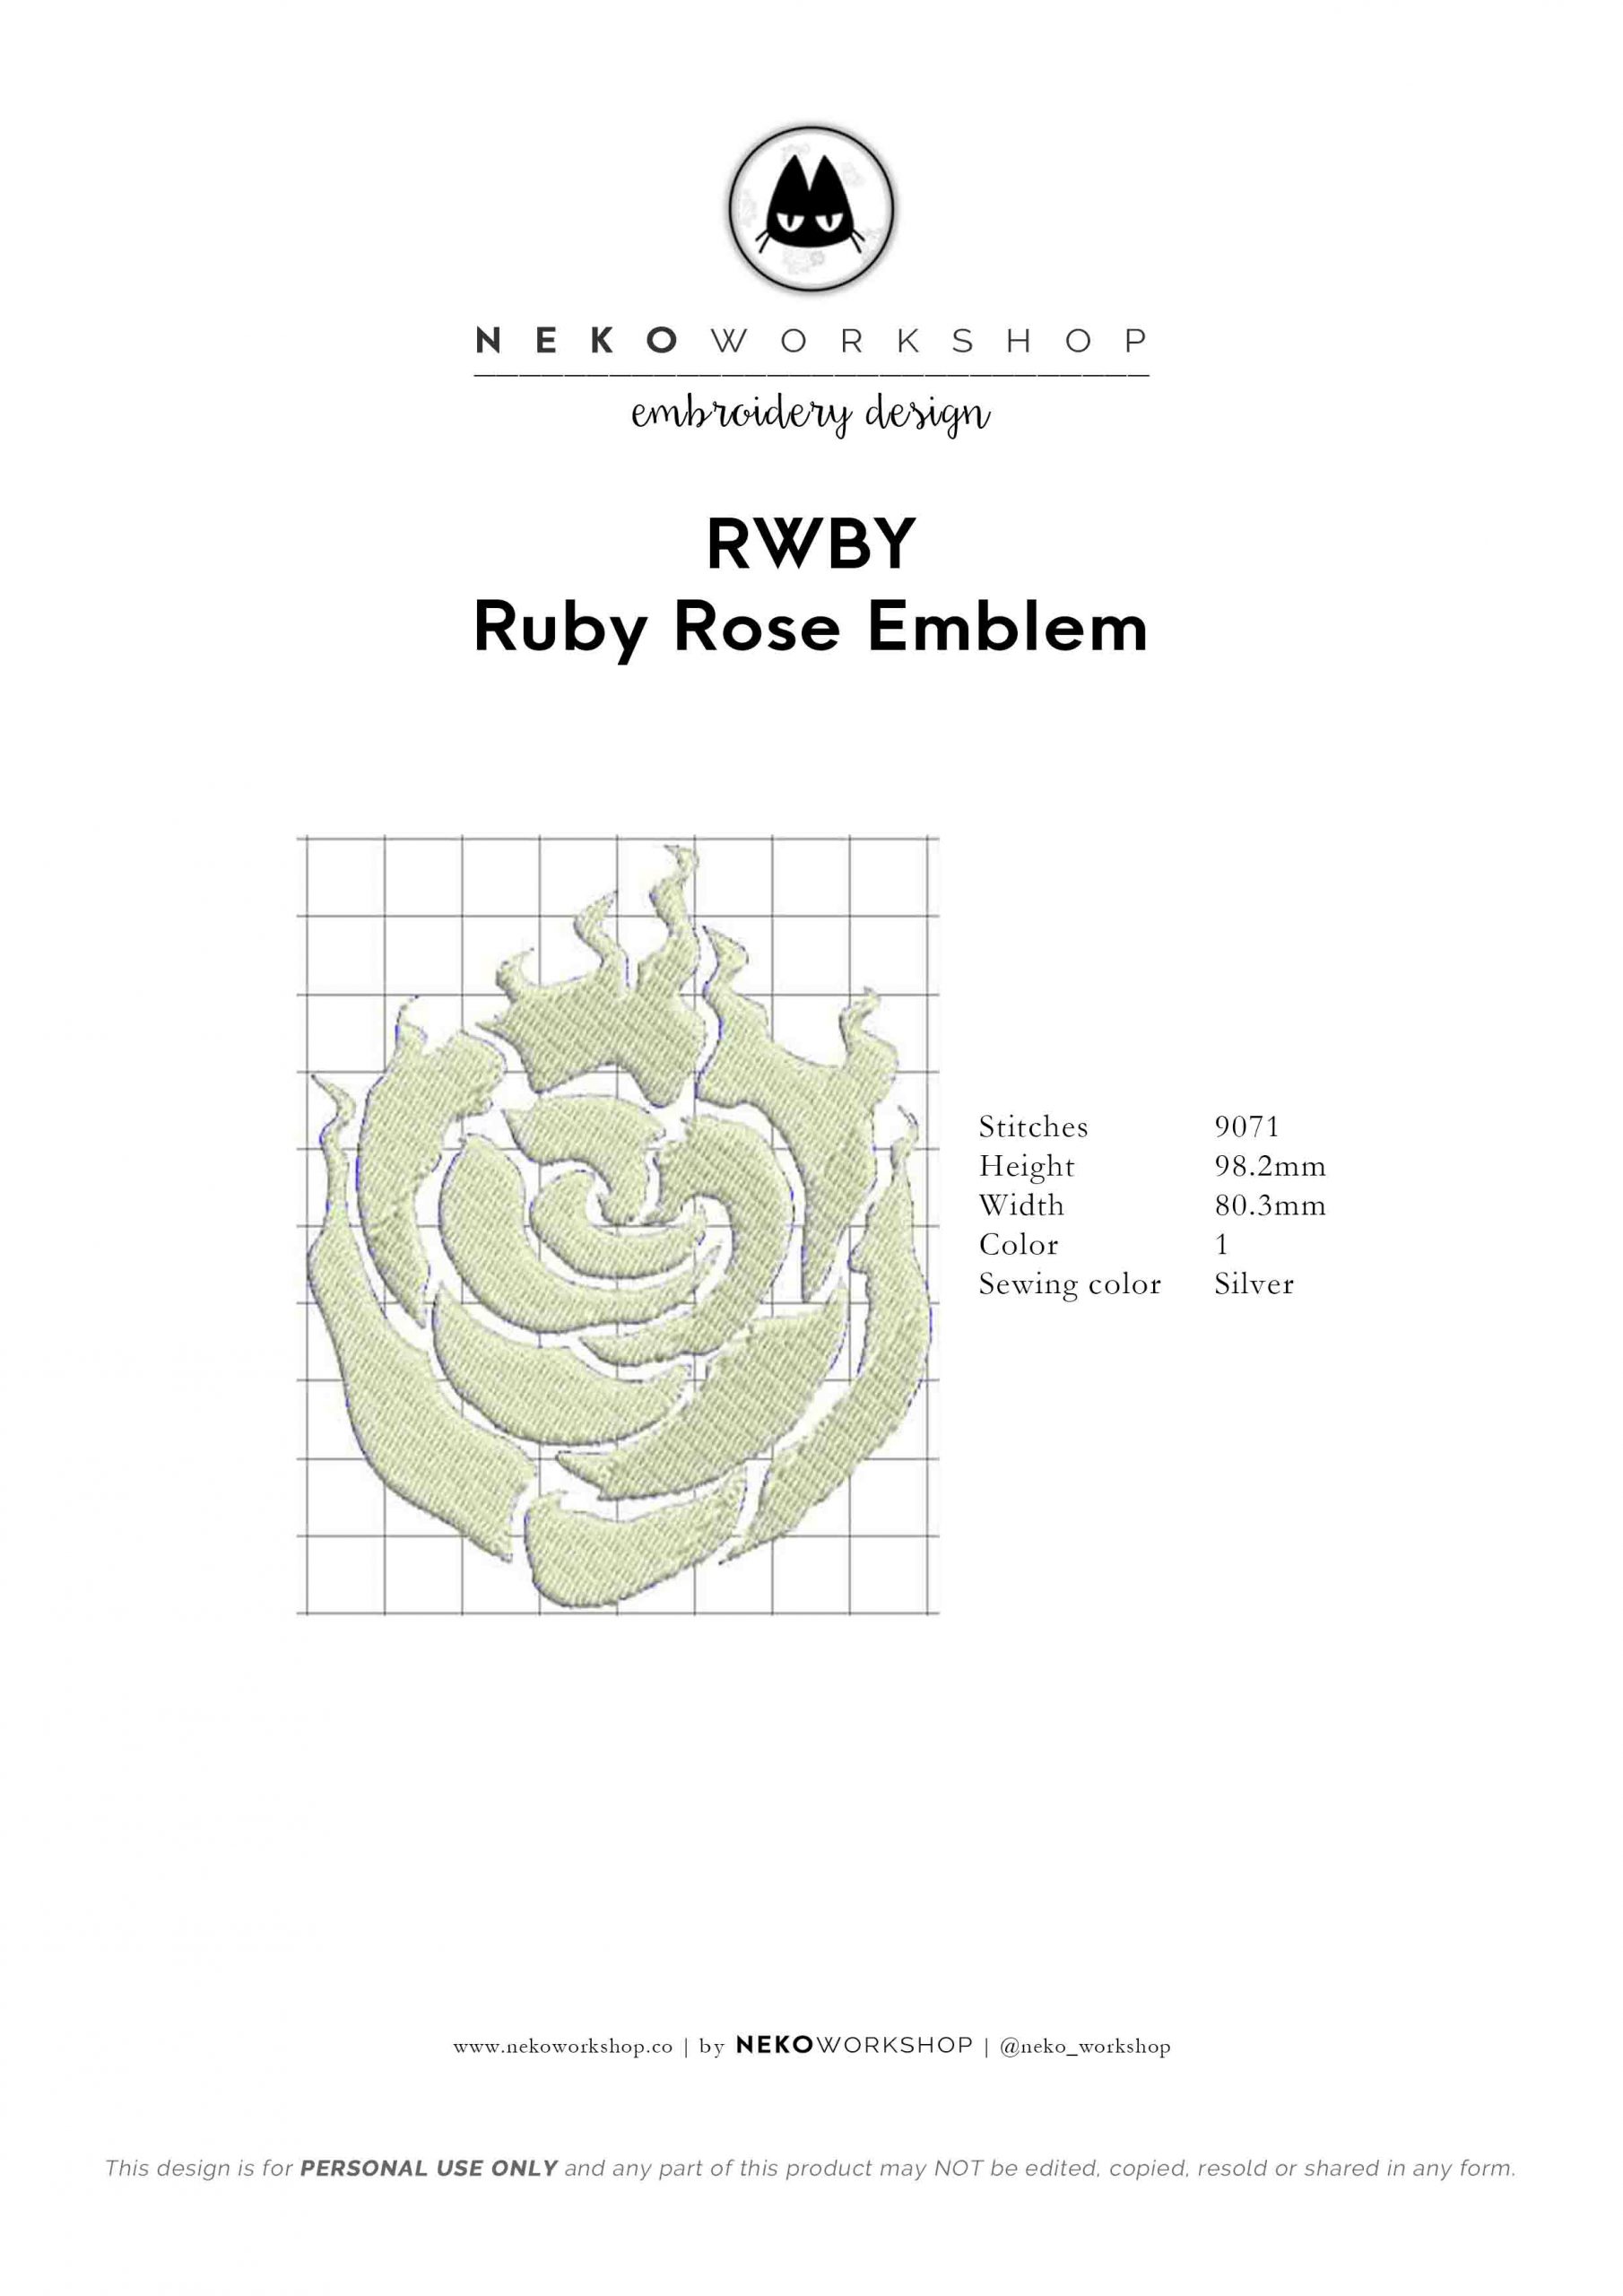 rwby ruby rose cosplay embroidery patch design